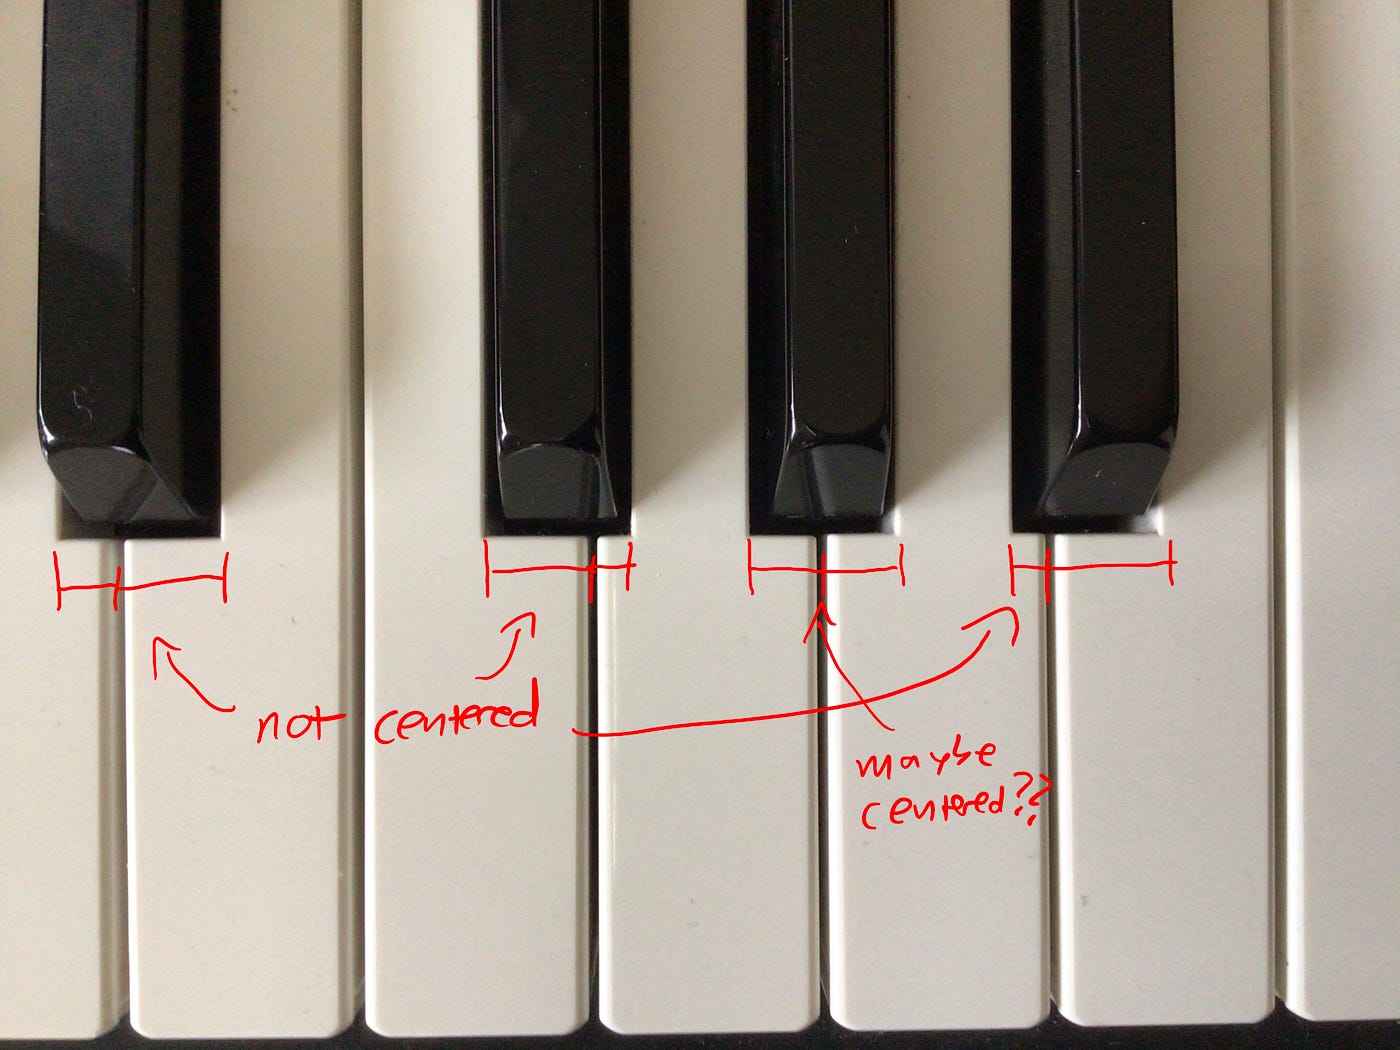 Drawing a flat piano keyboard in Illustrator | by Nate May | Bootcamp